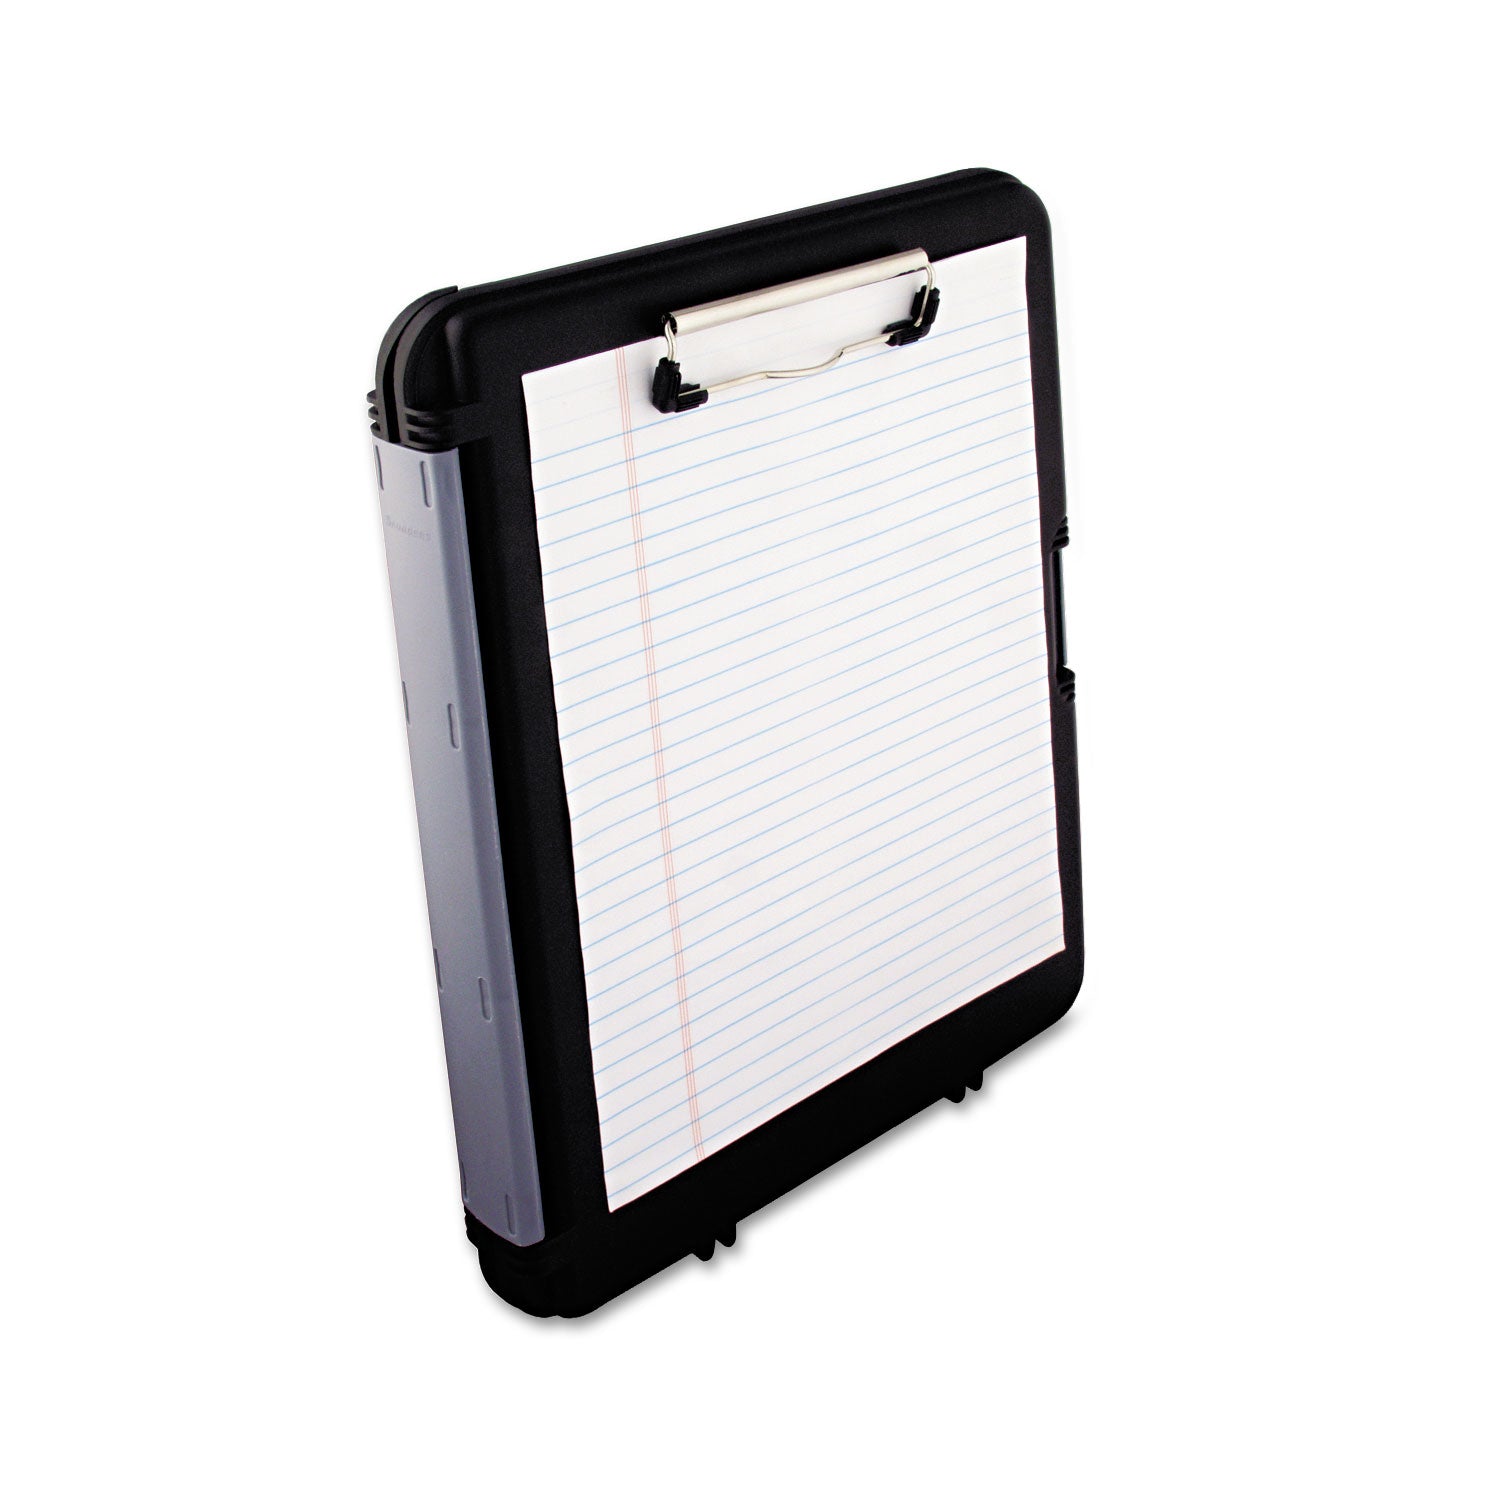 WorkMate II Storage Clipboard, 0.5" Clip Capacity, Holds 8.5 x 11 Sheets, Black/Charcoal - 